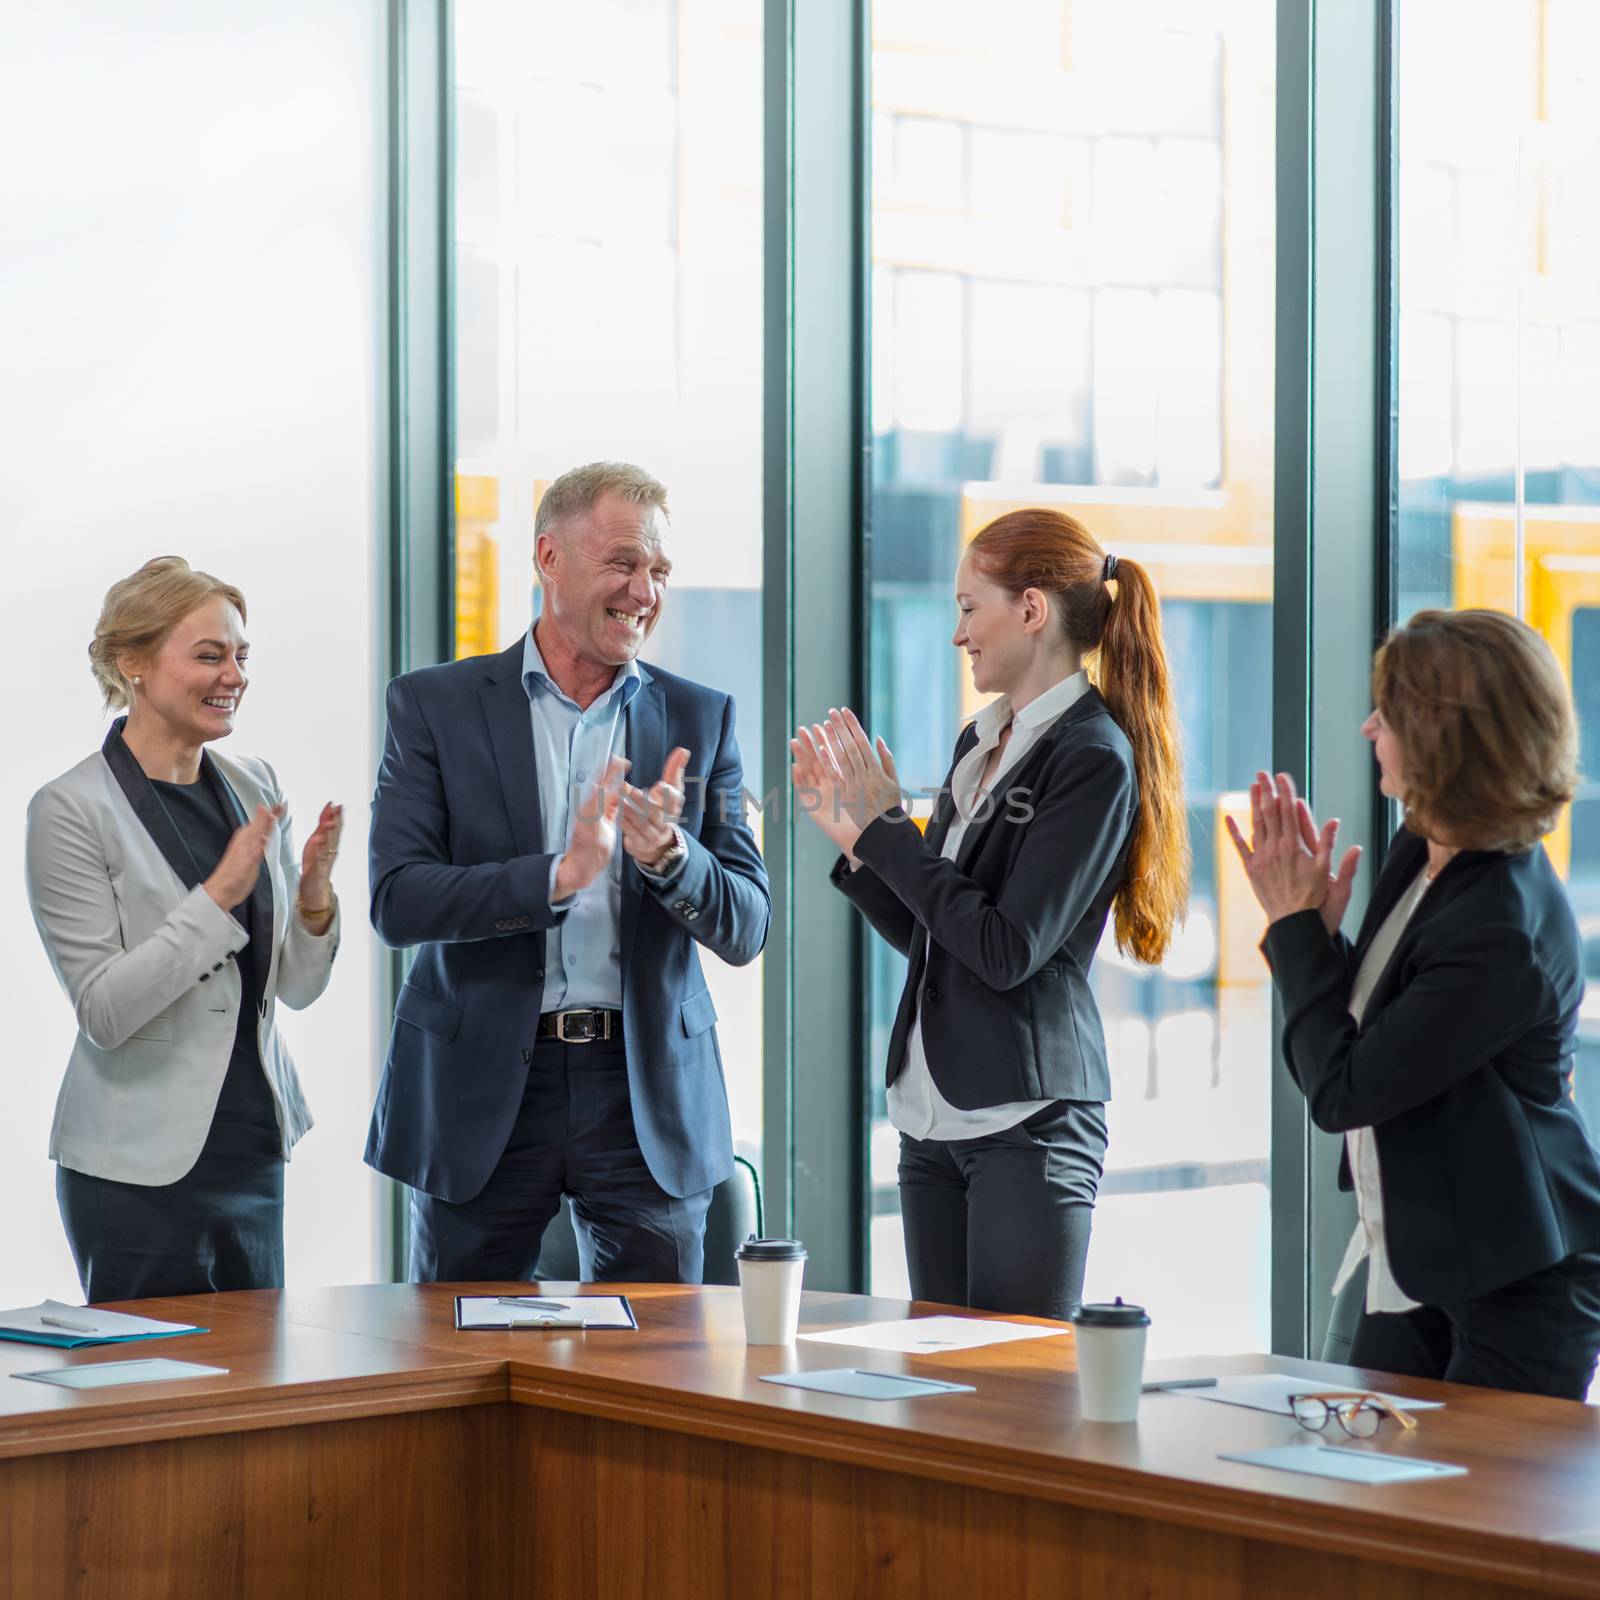 Business people group clapping and smiling in office standing around meeting table